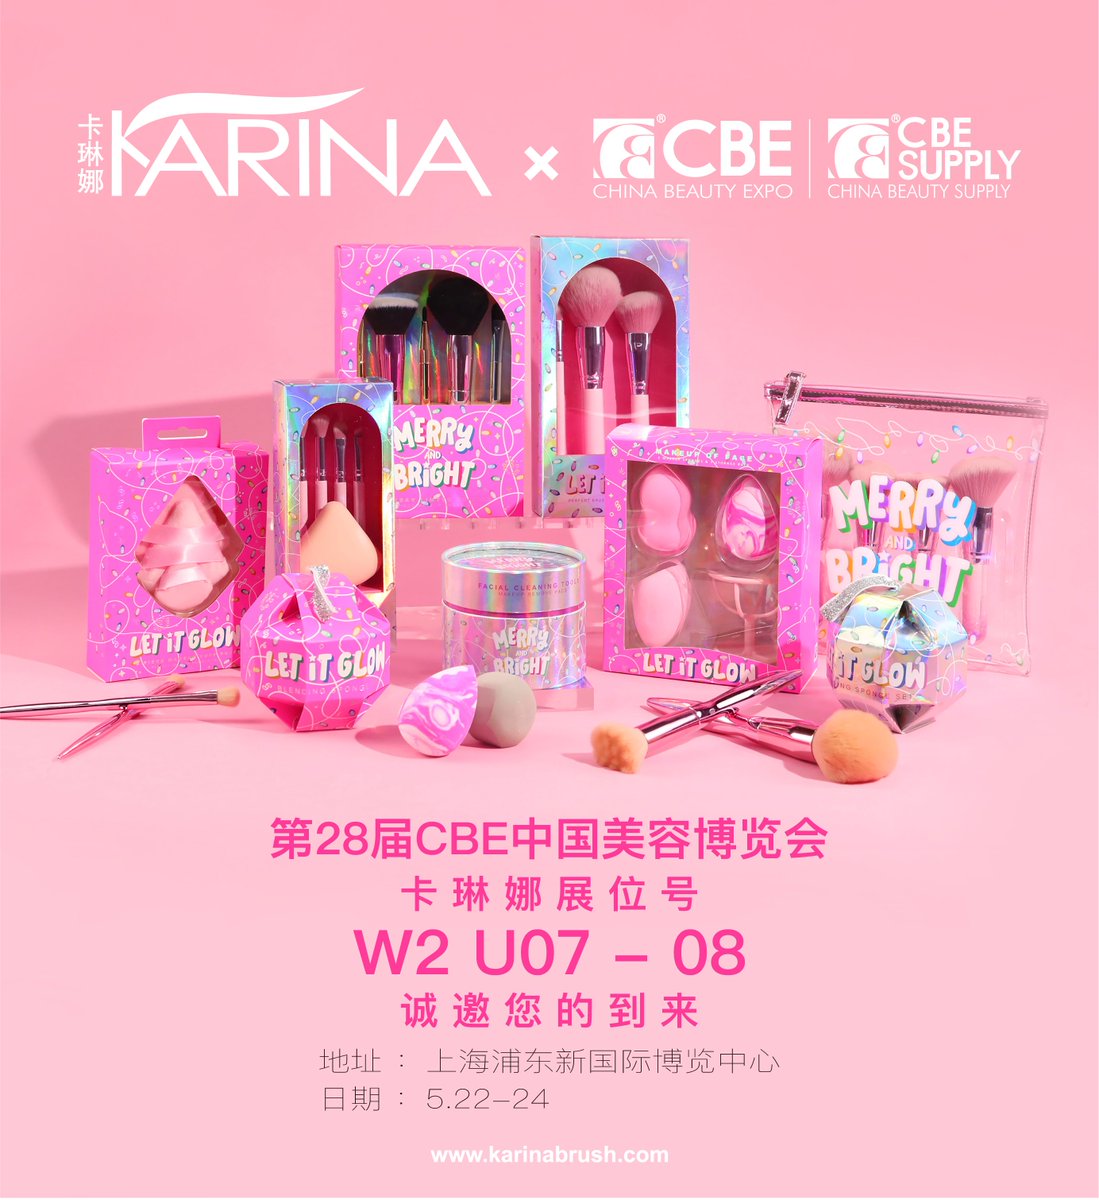 Meet us at CBE(China beauty expo) in SHANGHAI 22-24th May.
Stand:W2 U07-08.
We're waiting for you.
+14 years manufacturing in makeup accessories.
BSCI,Semta,FSC,OCS,WCA,ISO certificated factory.
Contact us to make your own accessories.
Joyce<joyce.au@karinabrush.com>
#makeuptools